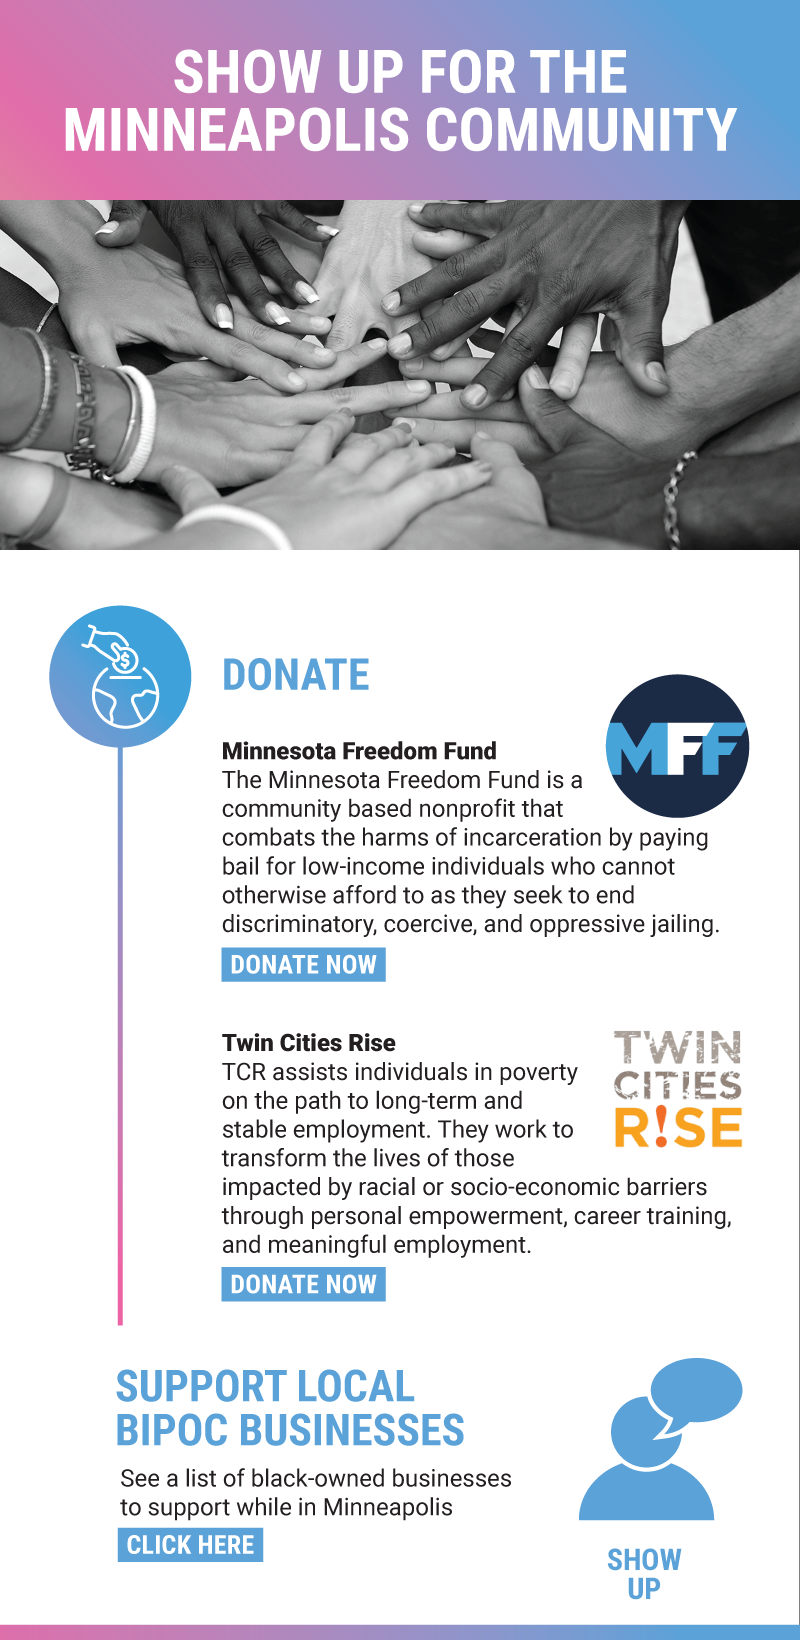 Show up for the Minneapolis Community - Donate to the Minnesota Freedom Fund or Twin Cities Rise, and support local black-owned businesses.